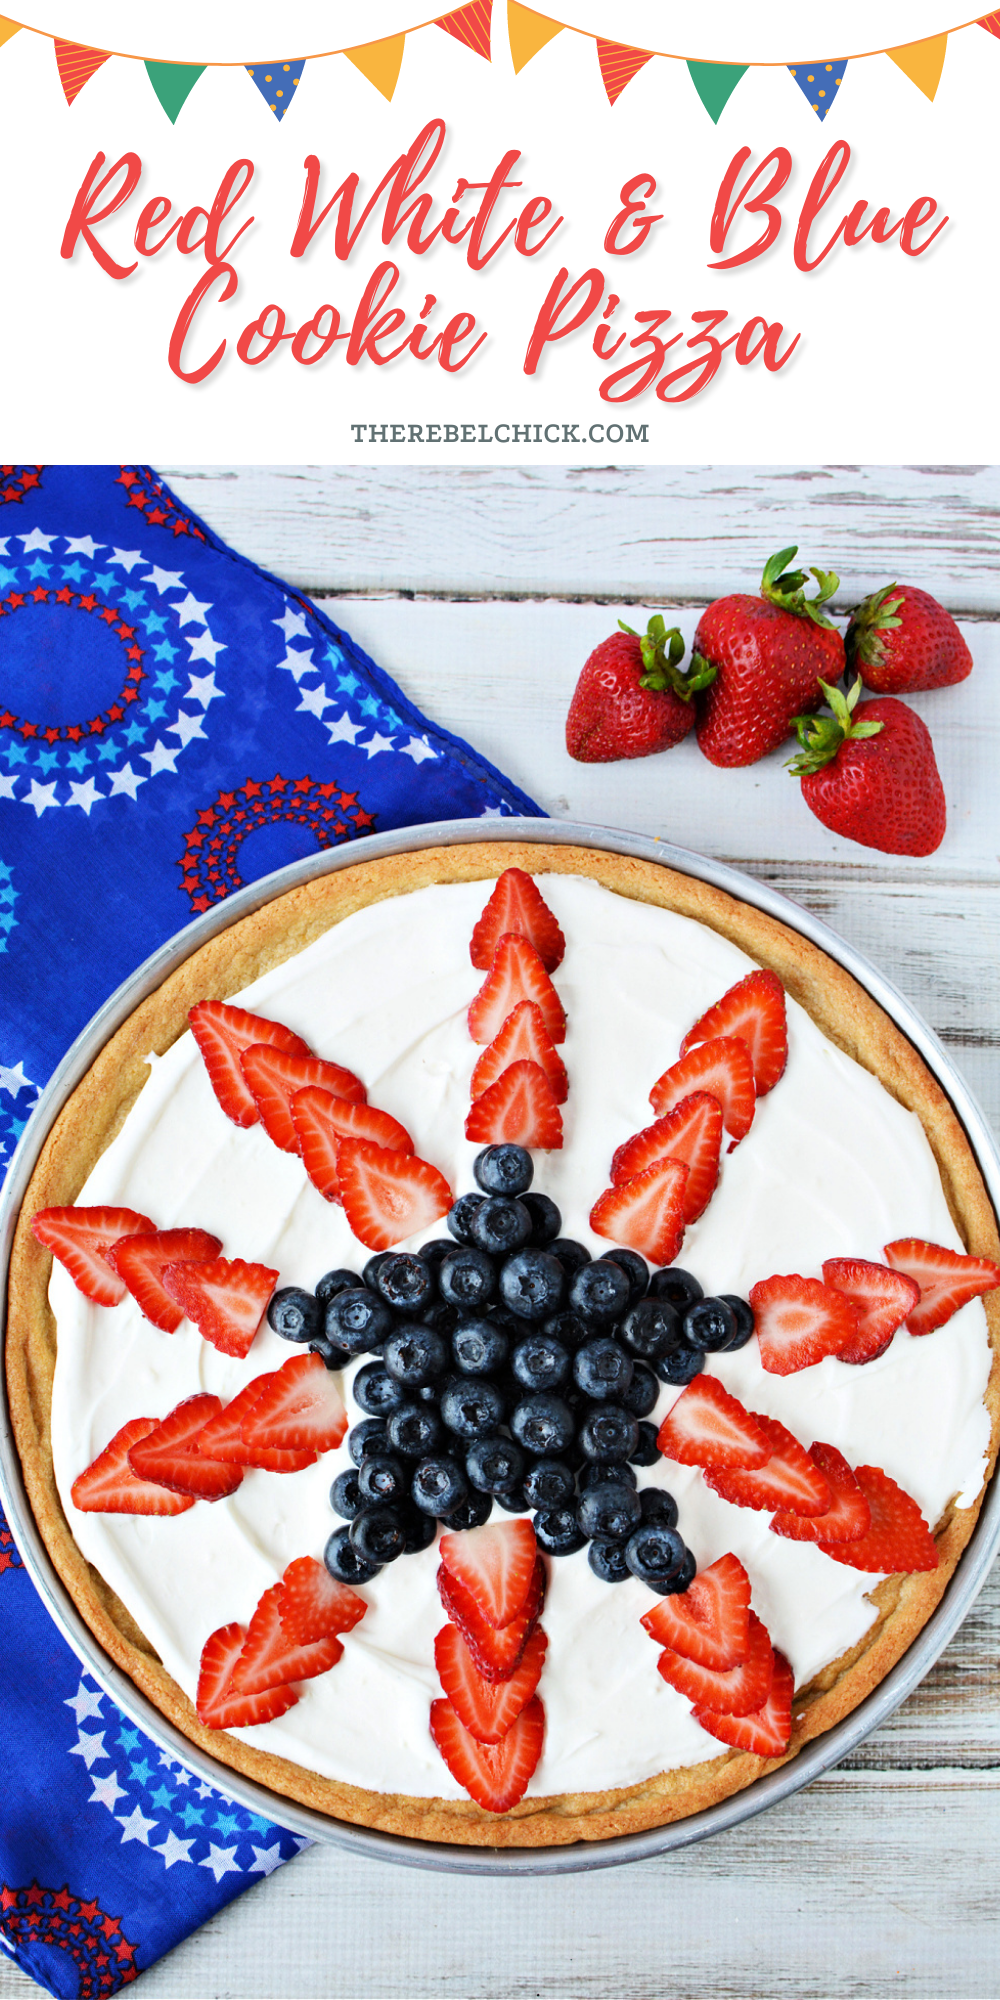 Red White and Blue Cookie Pizza Recipe for Memorial Day, 4th of July and Labor Day